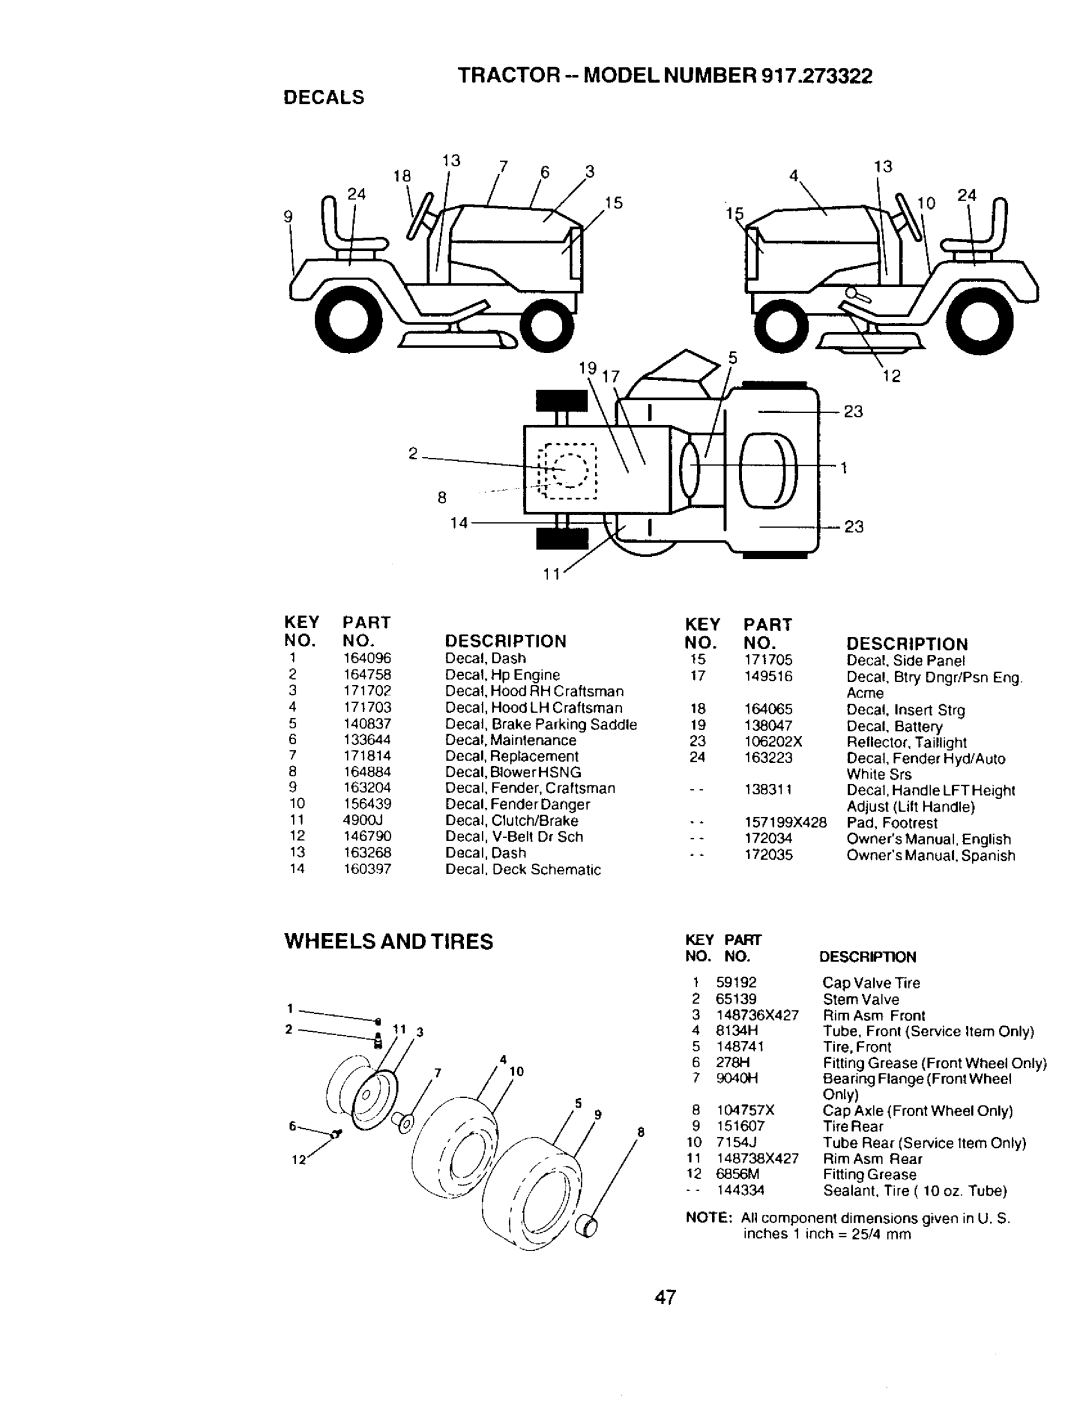 Craftsman 917.273322 owner manual Tractor --Model Number, Wheels And Tires 